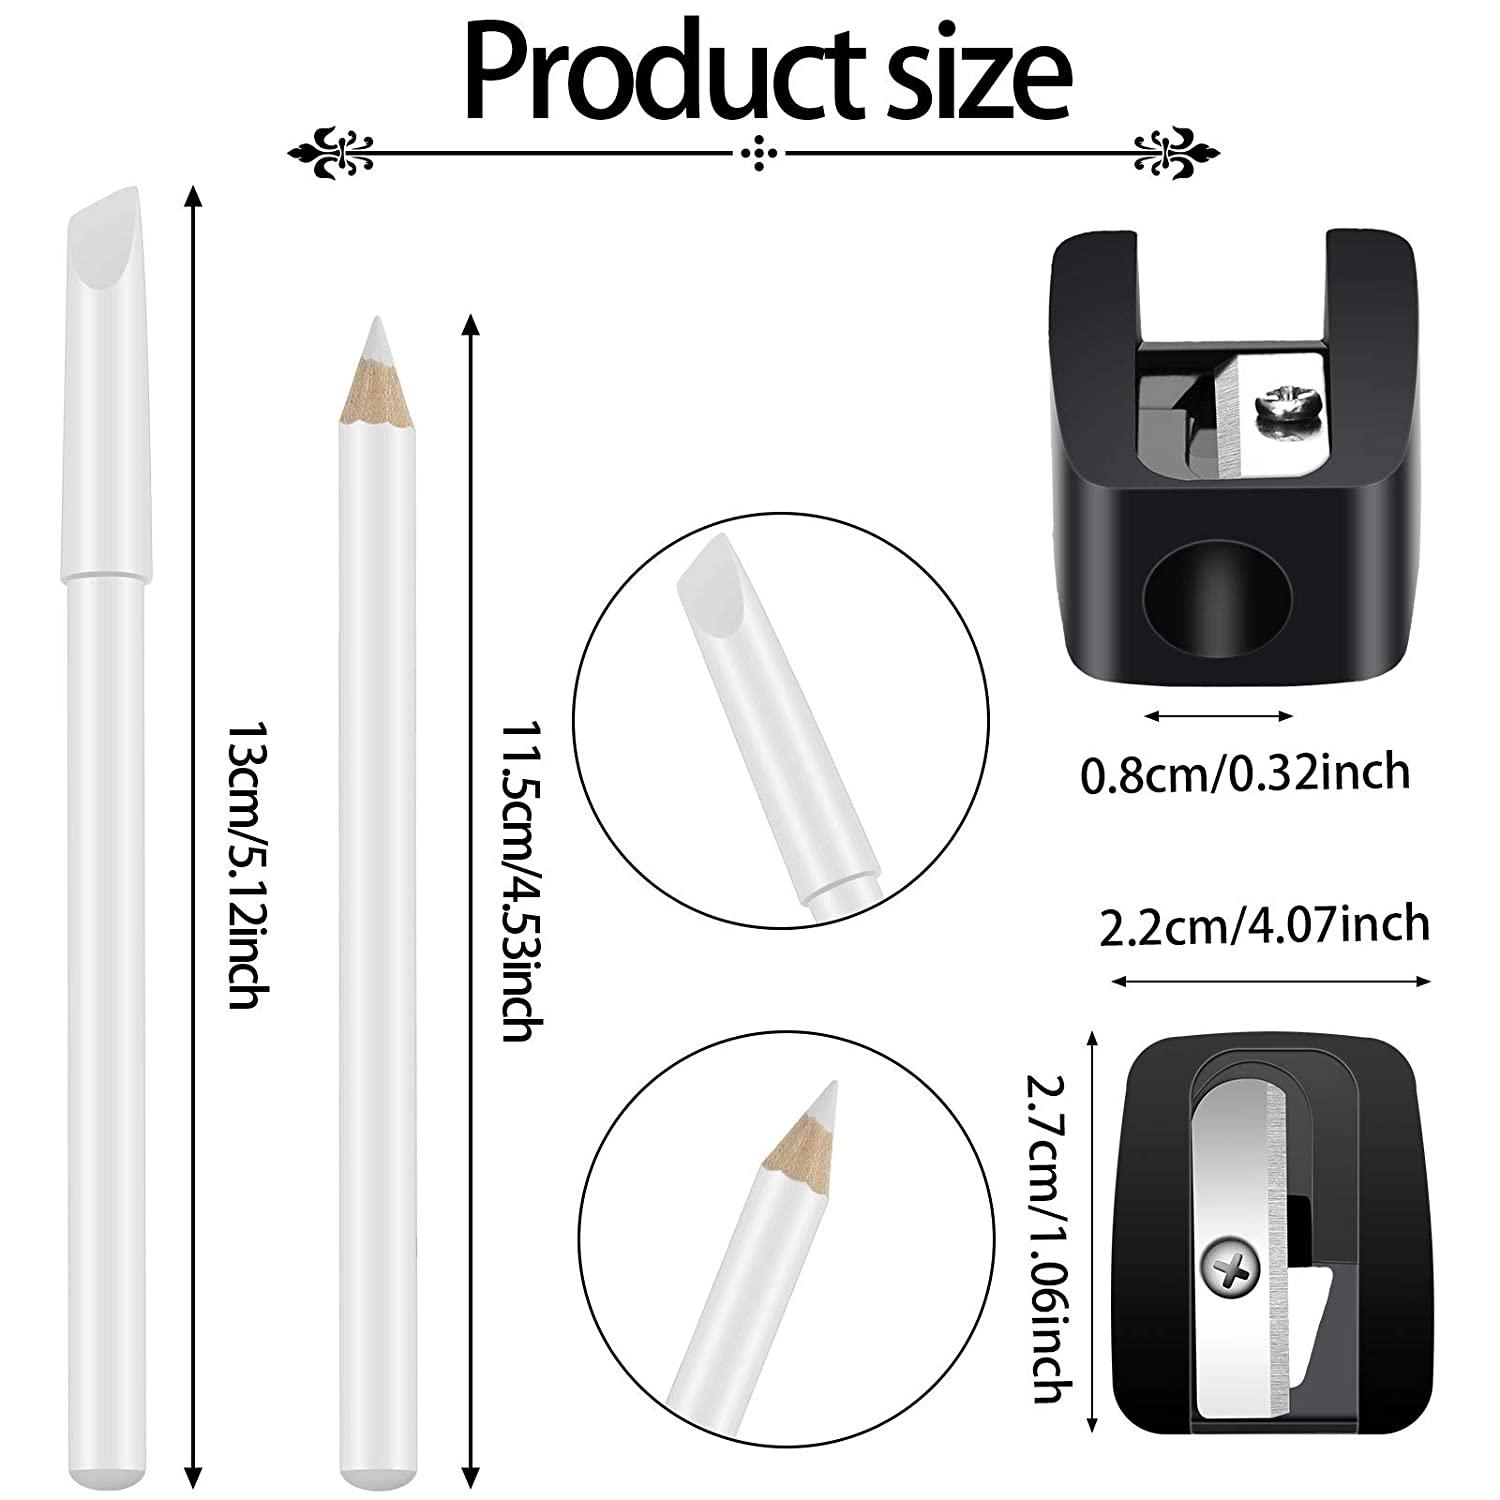 2 Pieces White Nail Pencil and Pencil Sharpener Set, 2 In1 Nail Whitening Pencils  Under Nail French Fingernail Pencils with Cuticle Pusher and Handheld Pencil  Sharpener for DIY Art Manicure Supplies